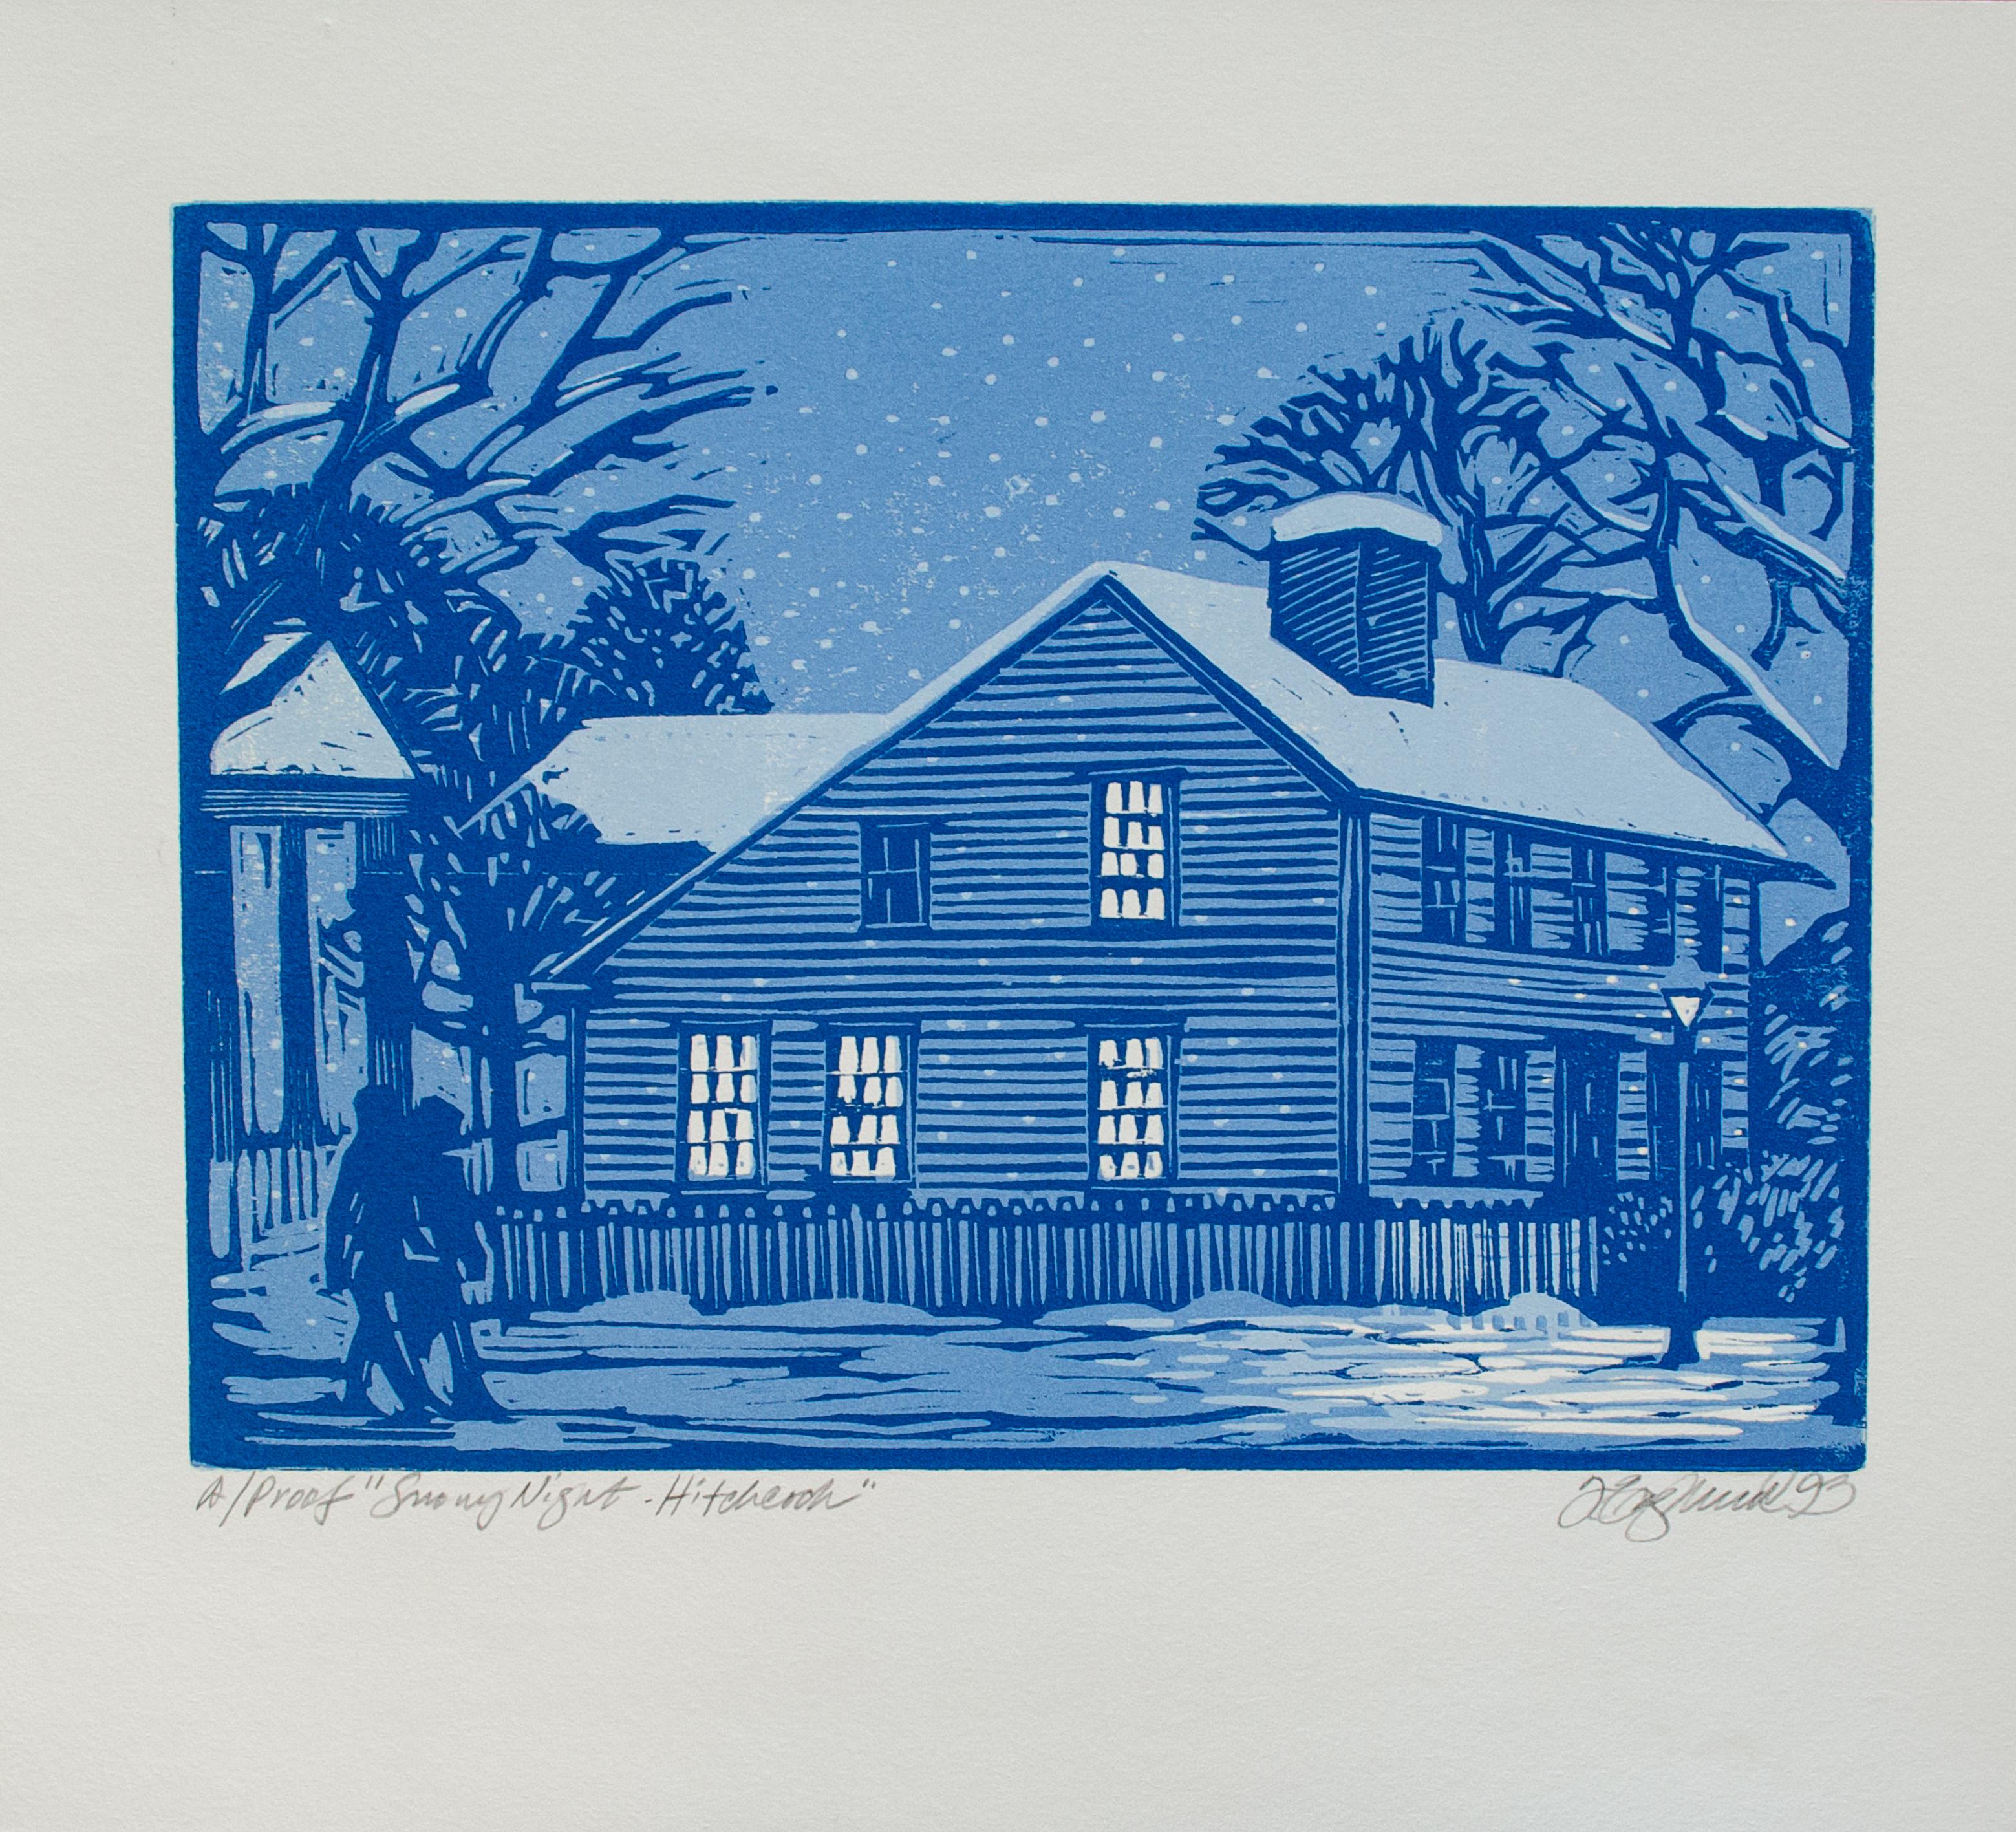 Tim Engelland (American, 1950-2012)
Snowy Night - Hitchcock, 1993
Woodcut 
8 1/2 x 9 in.
Titled, numbered, signed, and dated bottom: A/Proof, "Snowy Night - Hitchcock", T. Engelland, '93

A lifelong artist, Engelland specialized in oil portraits and